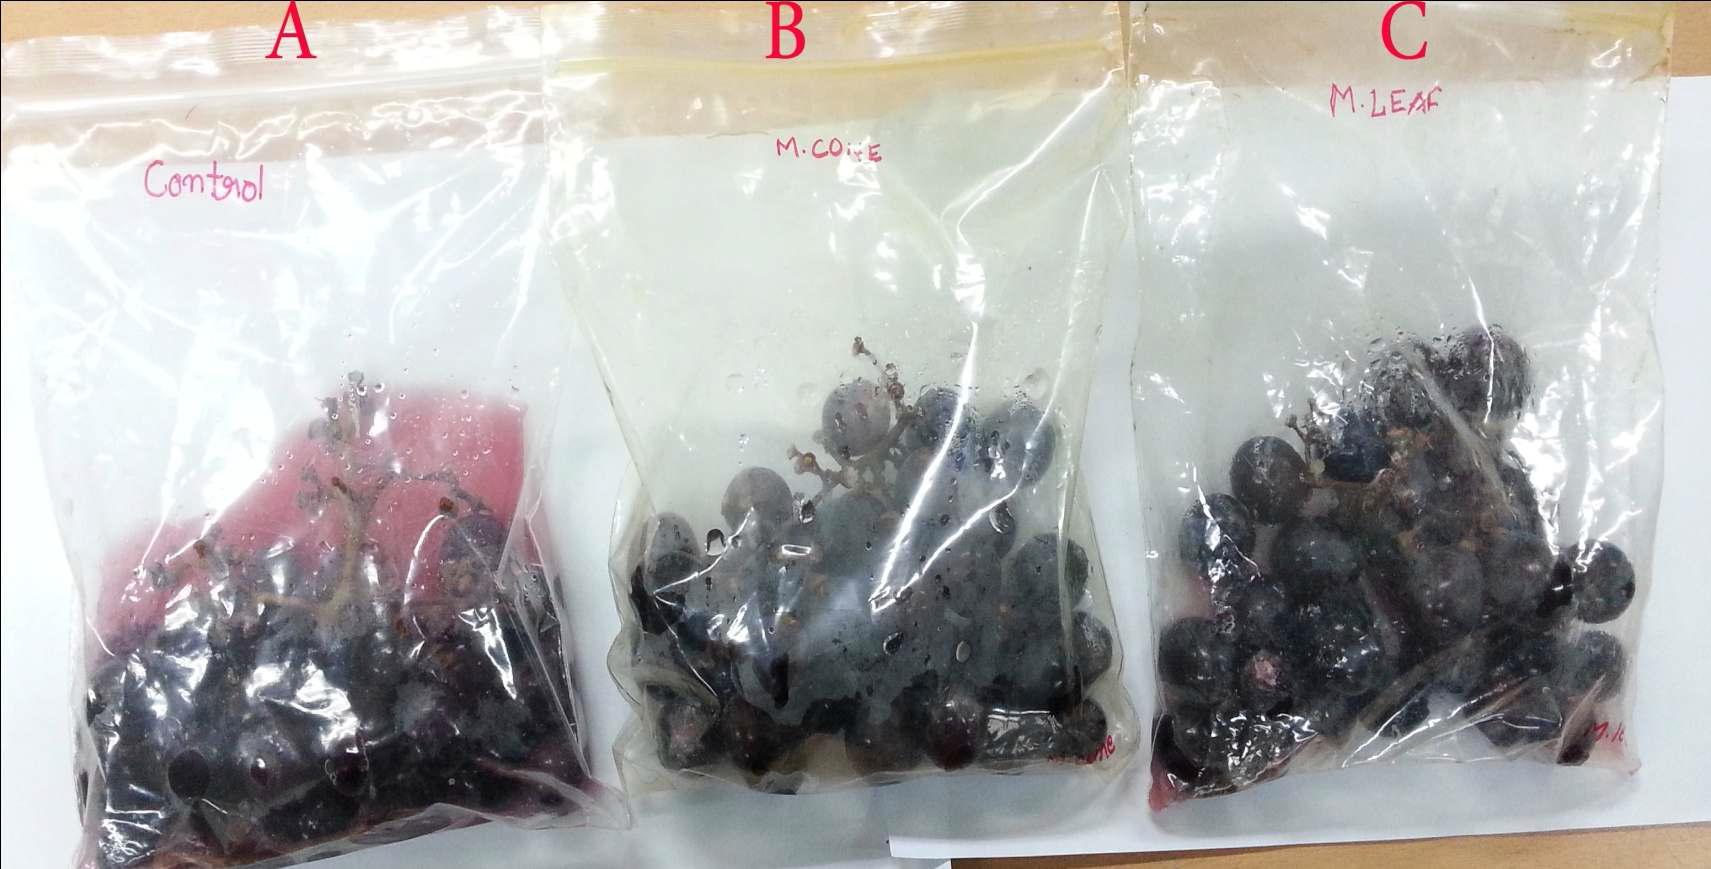 Grape samples packed in different PE film bags after seven days storage at 25 ± 1℃. (A) Control, (B) Metasequoia cone extract coated film, (C) Metasequoia leaf extract coated film.